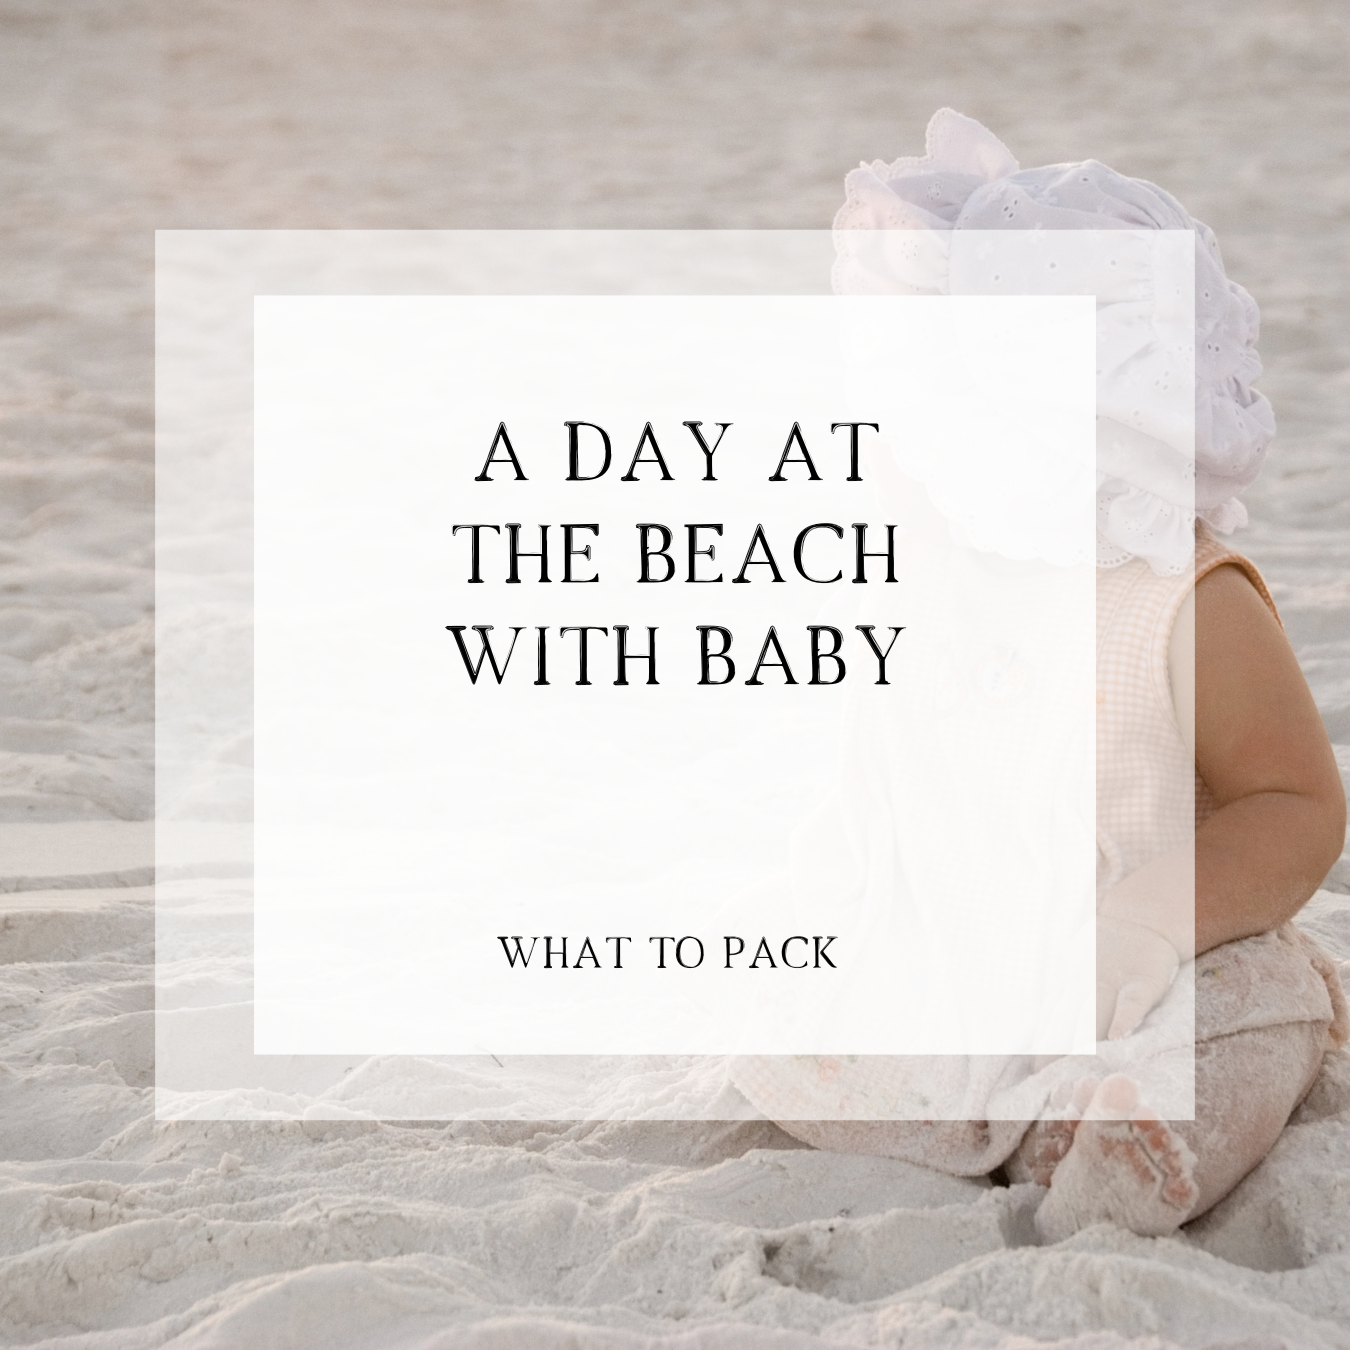 Beach Day Essentials: What to Pack for a Day at the Beach with Your Baby